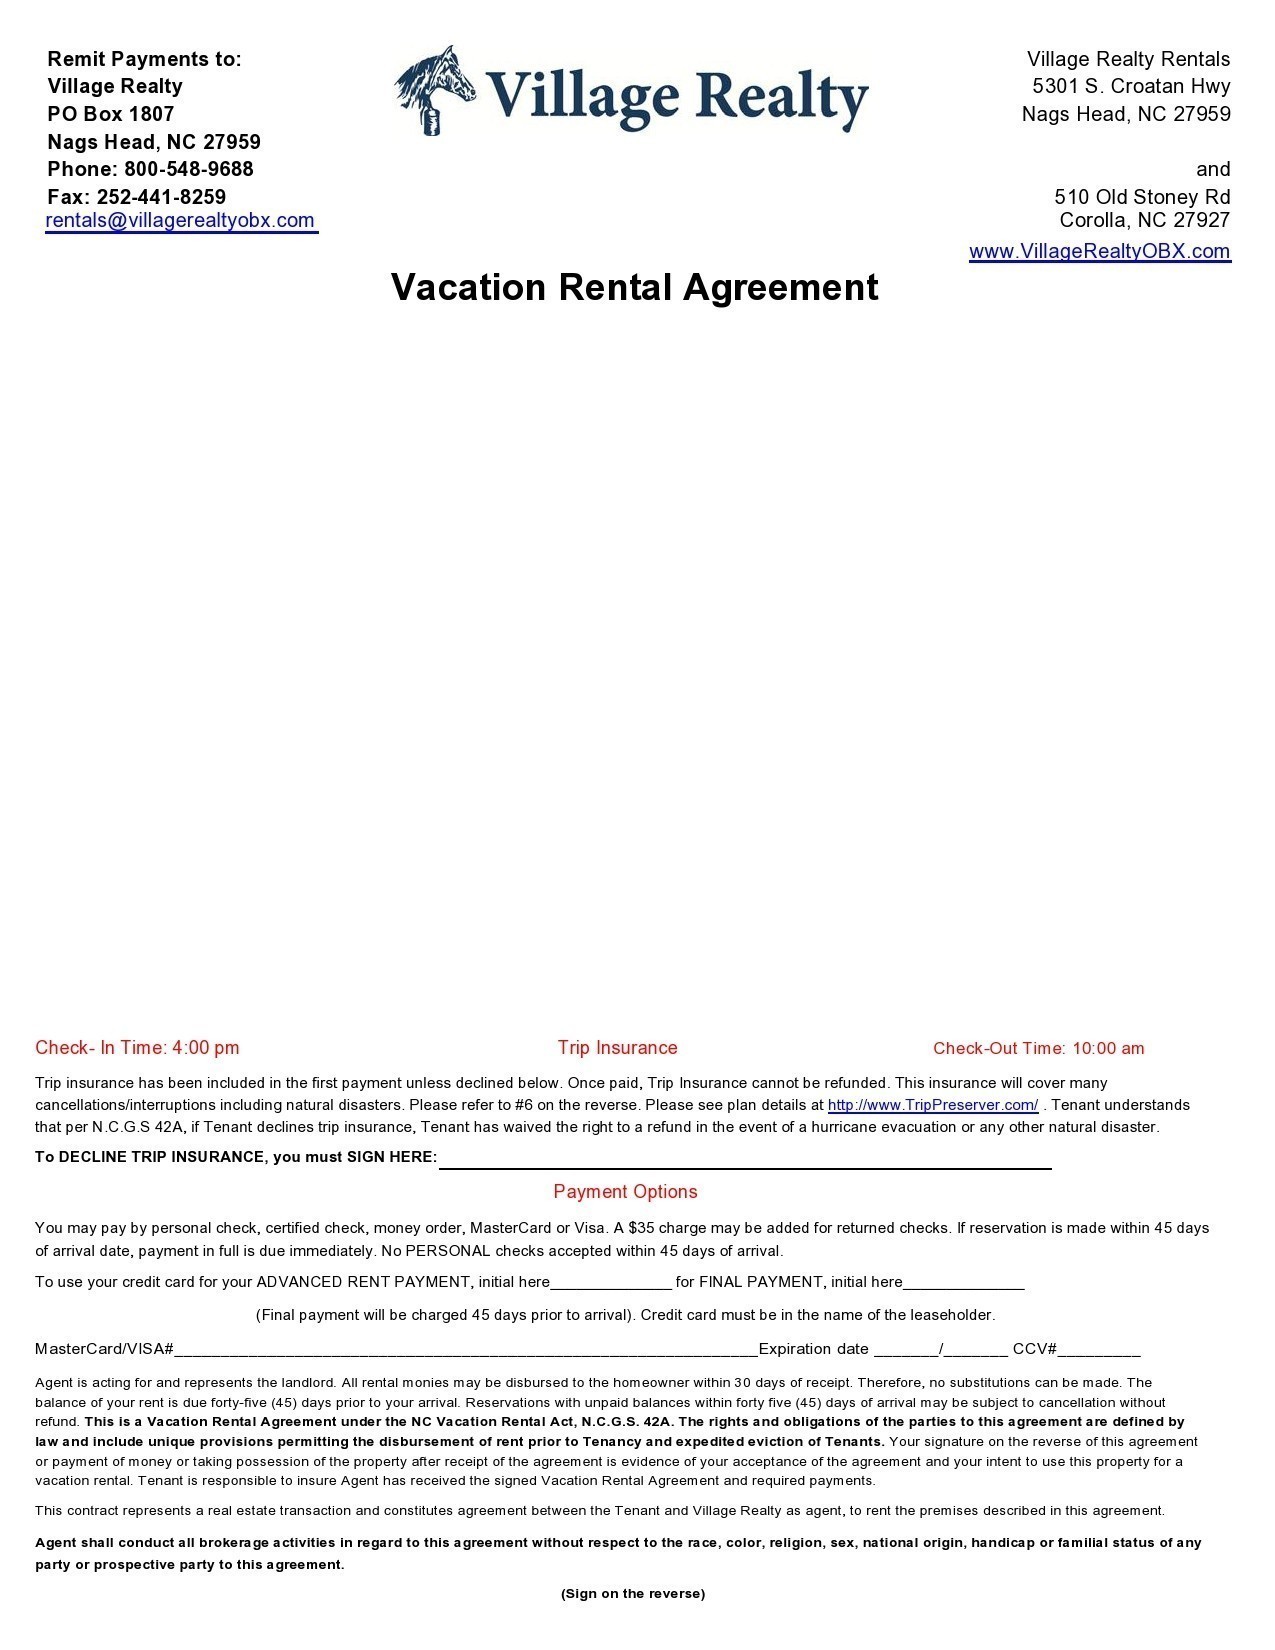 Free vacation rental agreement 25